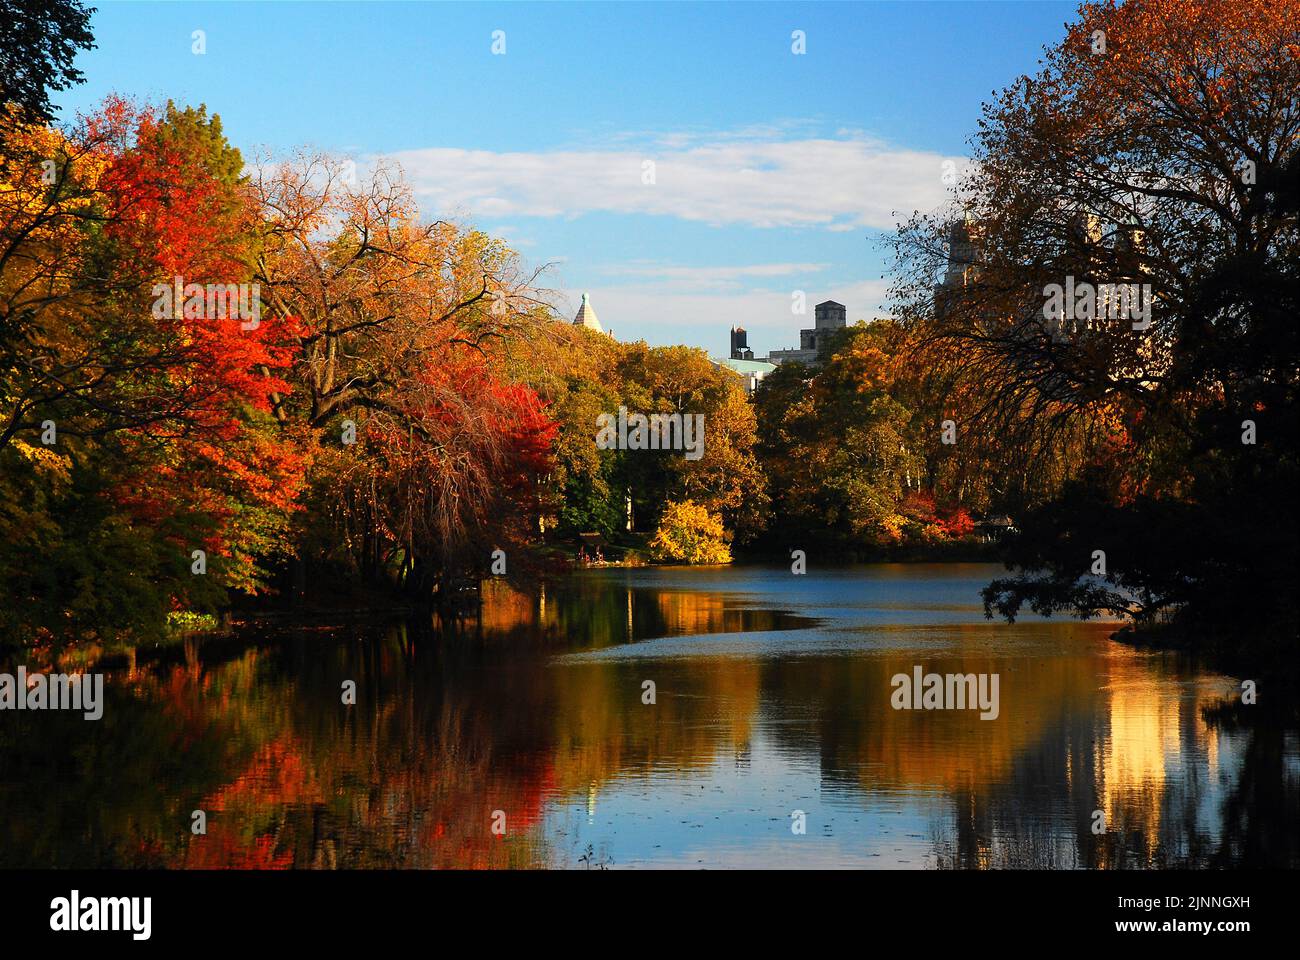 The autumn colors and fall foliage are reflected in the calm waters of the lake in New York's Central park on a crisp sunny day Stock Photo